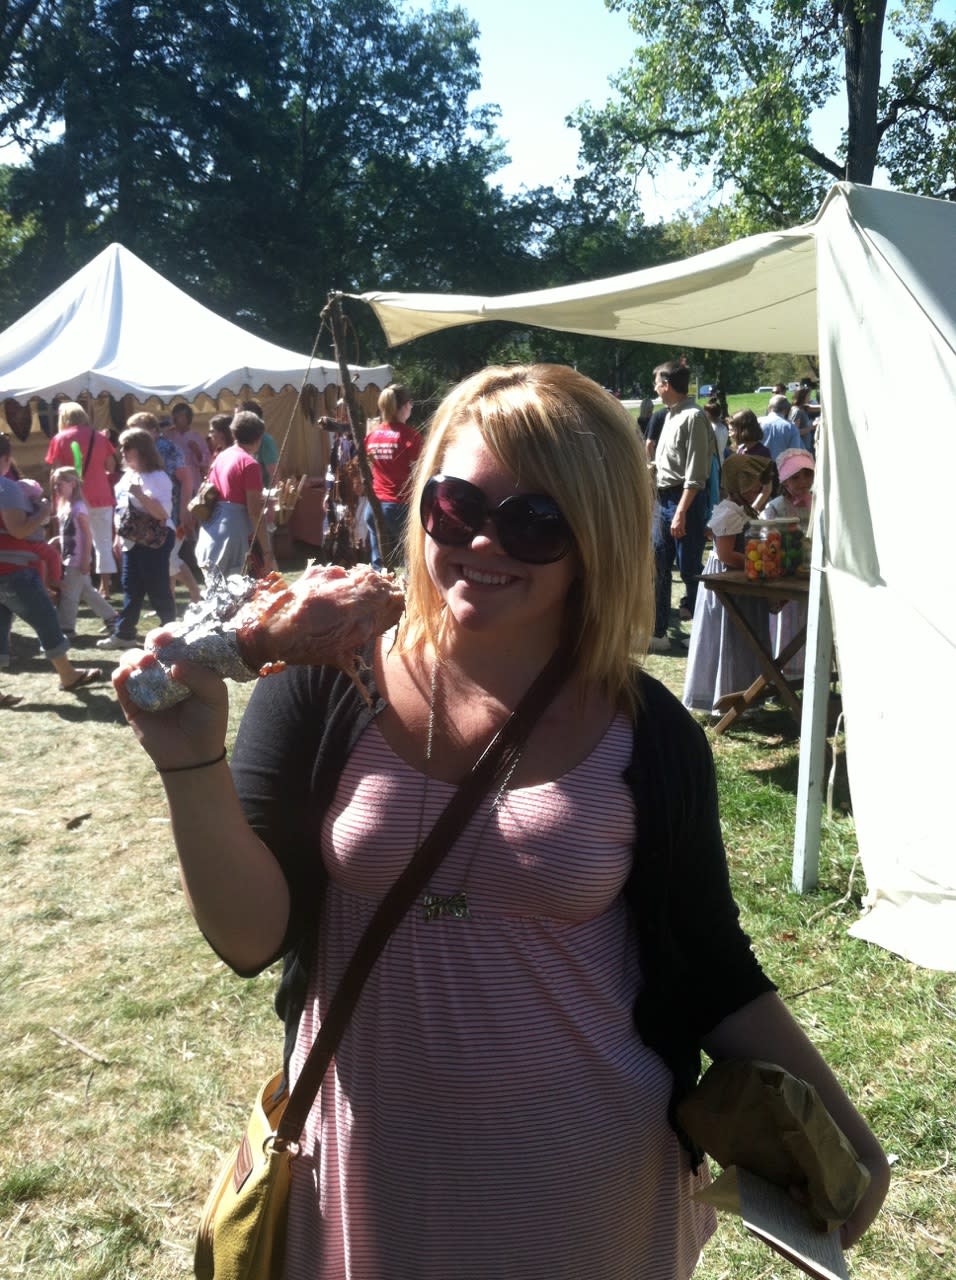 Giant turkey legs are one of the must-eat items at the Johnny Appleseed Festival!